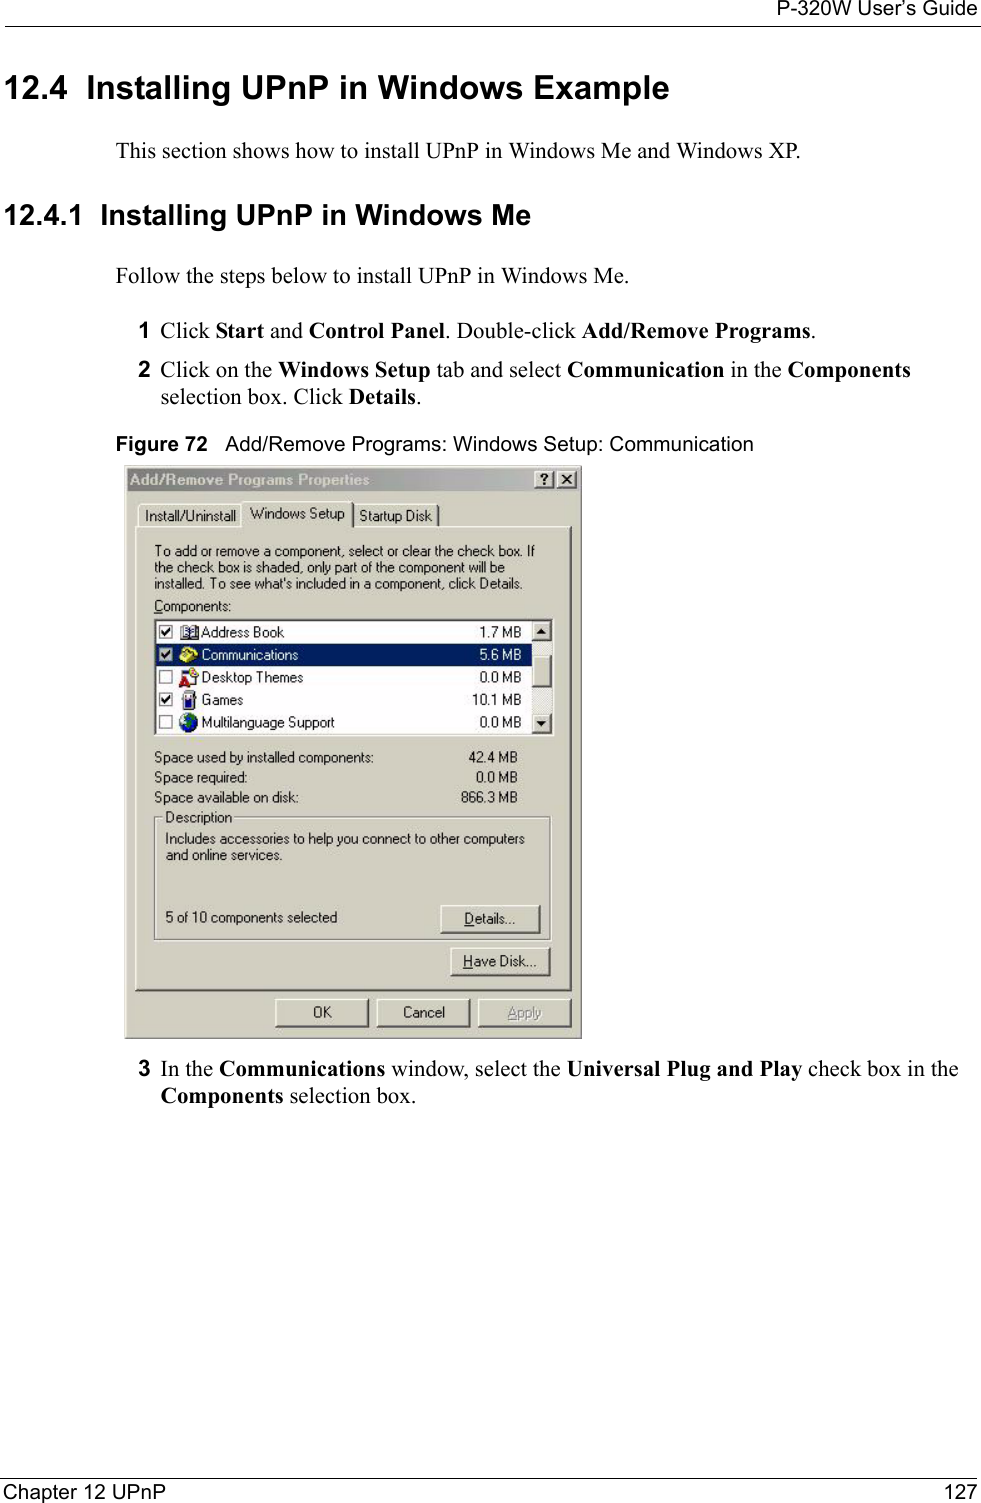 P-320W User’s GuideChapter 12 UPnP 12712.4  Installing UPnP in Windows ExampleThis section shows how to install UPnP in Windows Me and Windows XP.  12.4.1  Installing UPnP in Windows MeFollow the steps below to install UPnP in Windows Me.1Click Start and Control Panel. Double-click Add/Remove Programs.2Click on the Windows Setup tab and select Communication in the Components selection box. Click Details.  Figure 72   Add/Remove Programs: Windows Setup: Communication 3In the Communications window, select the Universal Plug and Play check box in the Components selection box. 